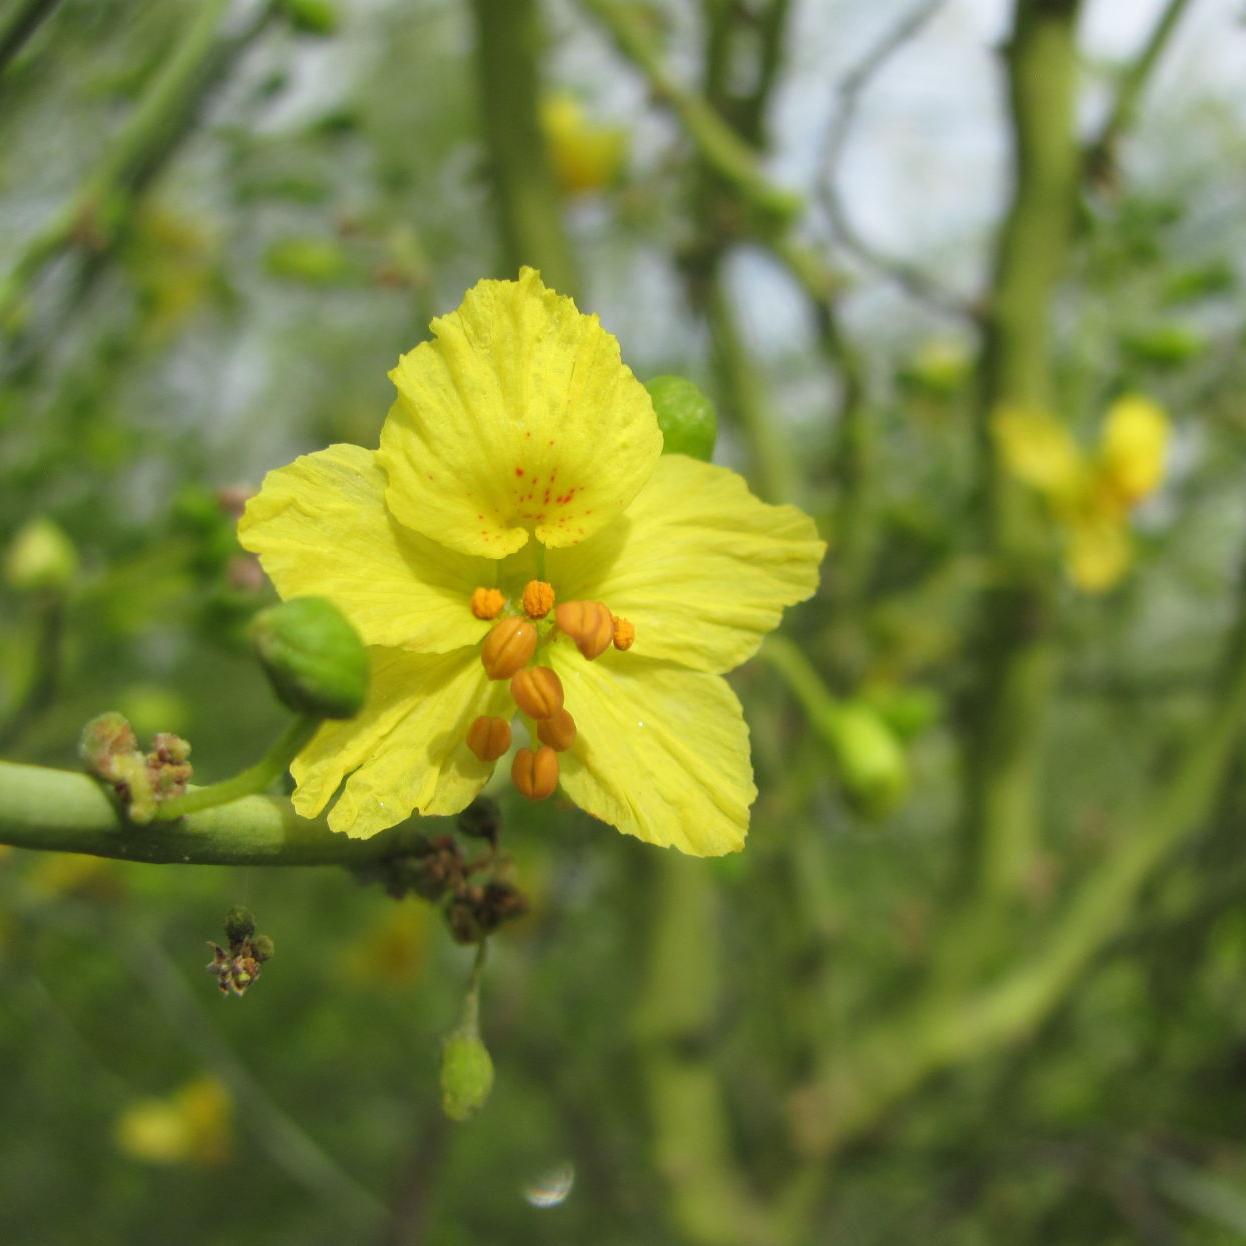 Palo Verde Blooms Beautiful But Bad News For Some With Allergies